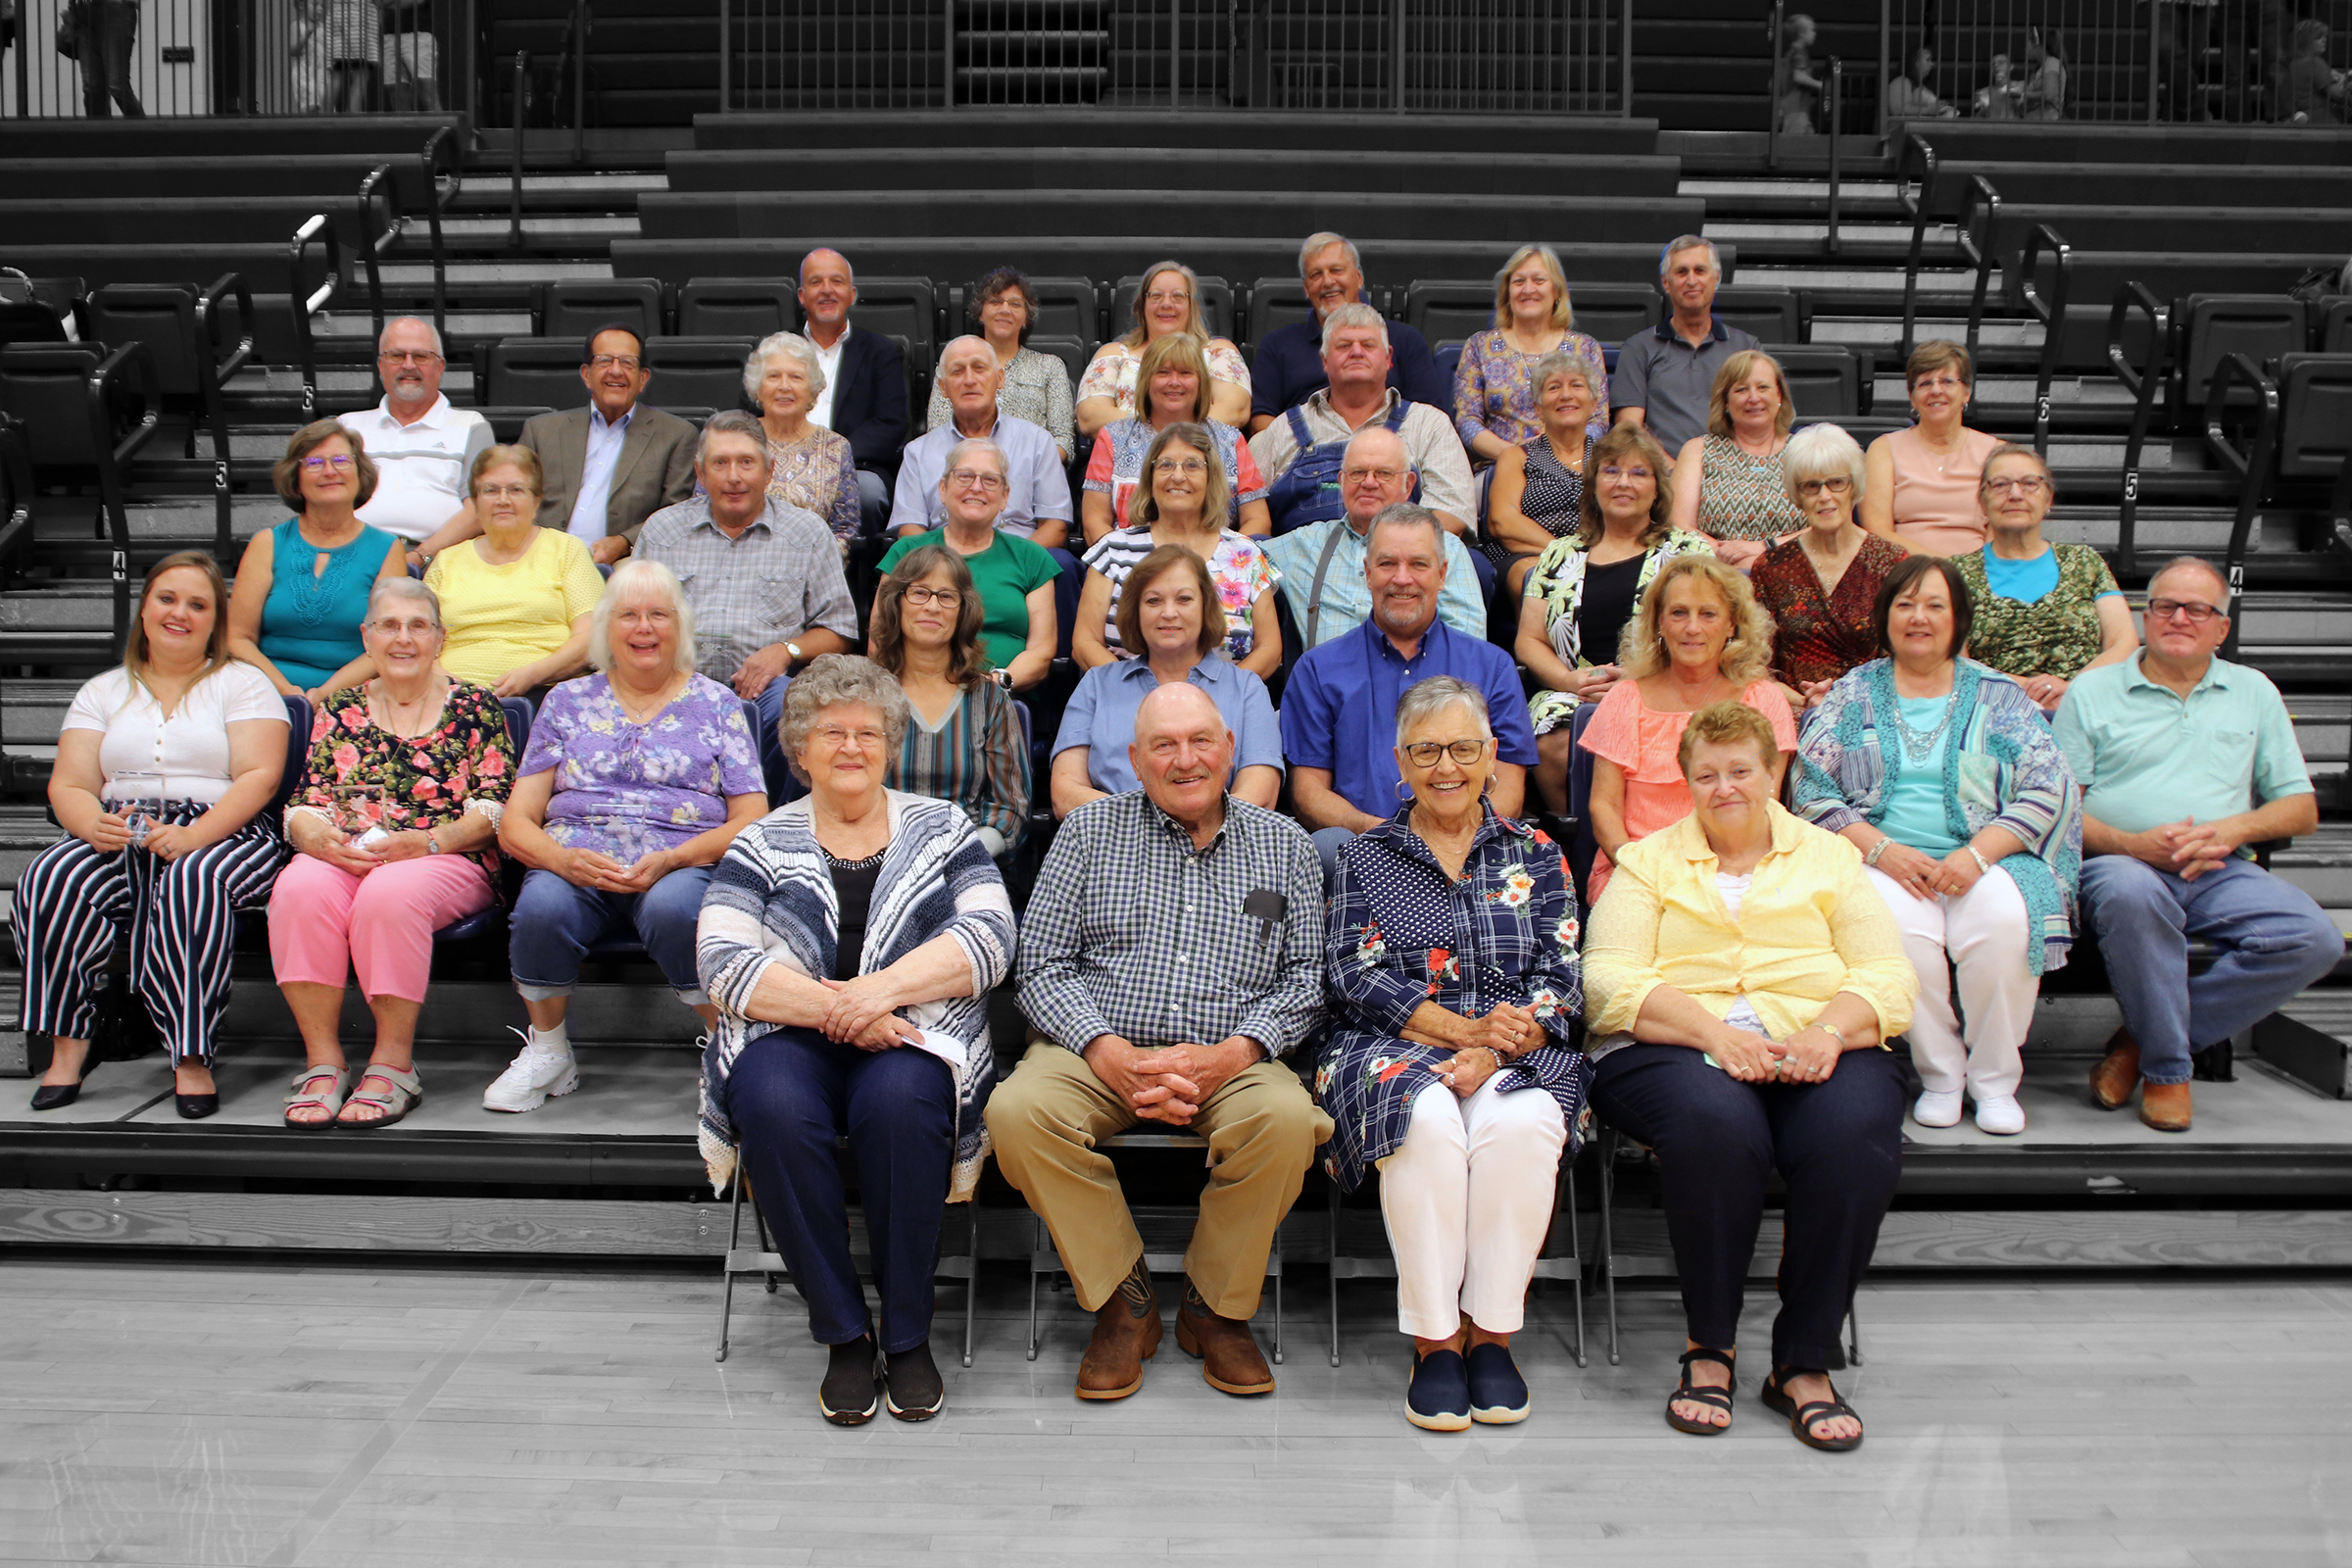 2023 inductees in the Missouri 4-H Hall of Fame. (Photo by Amanda Stapp.)